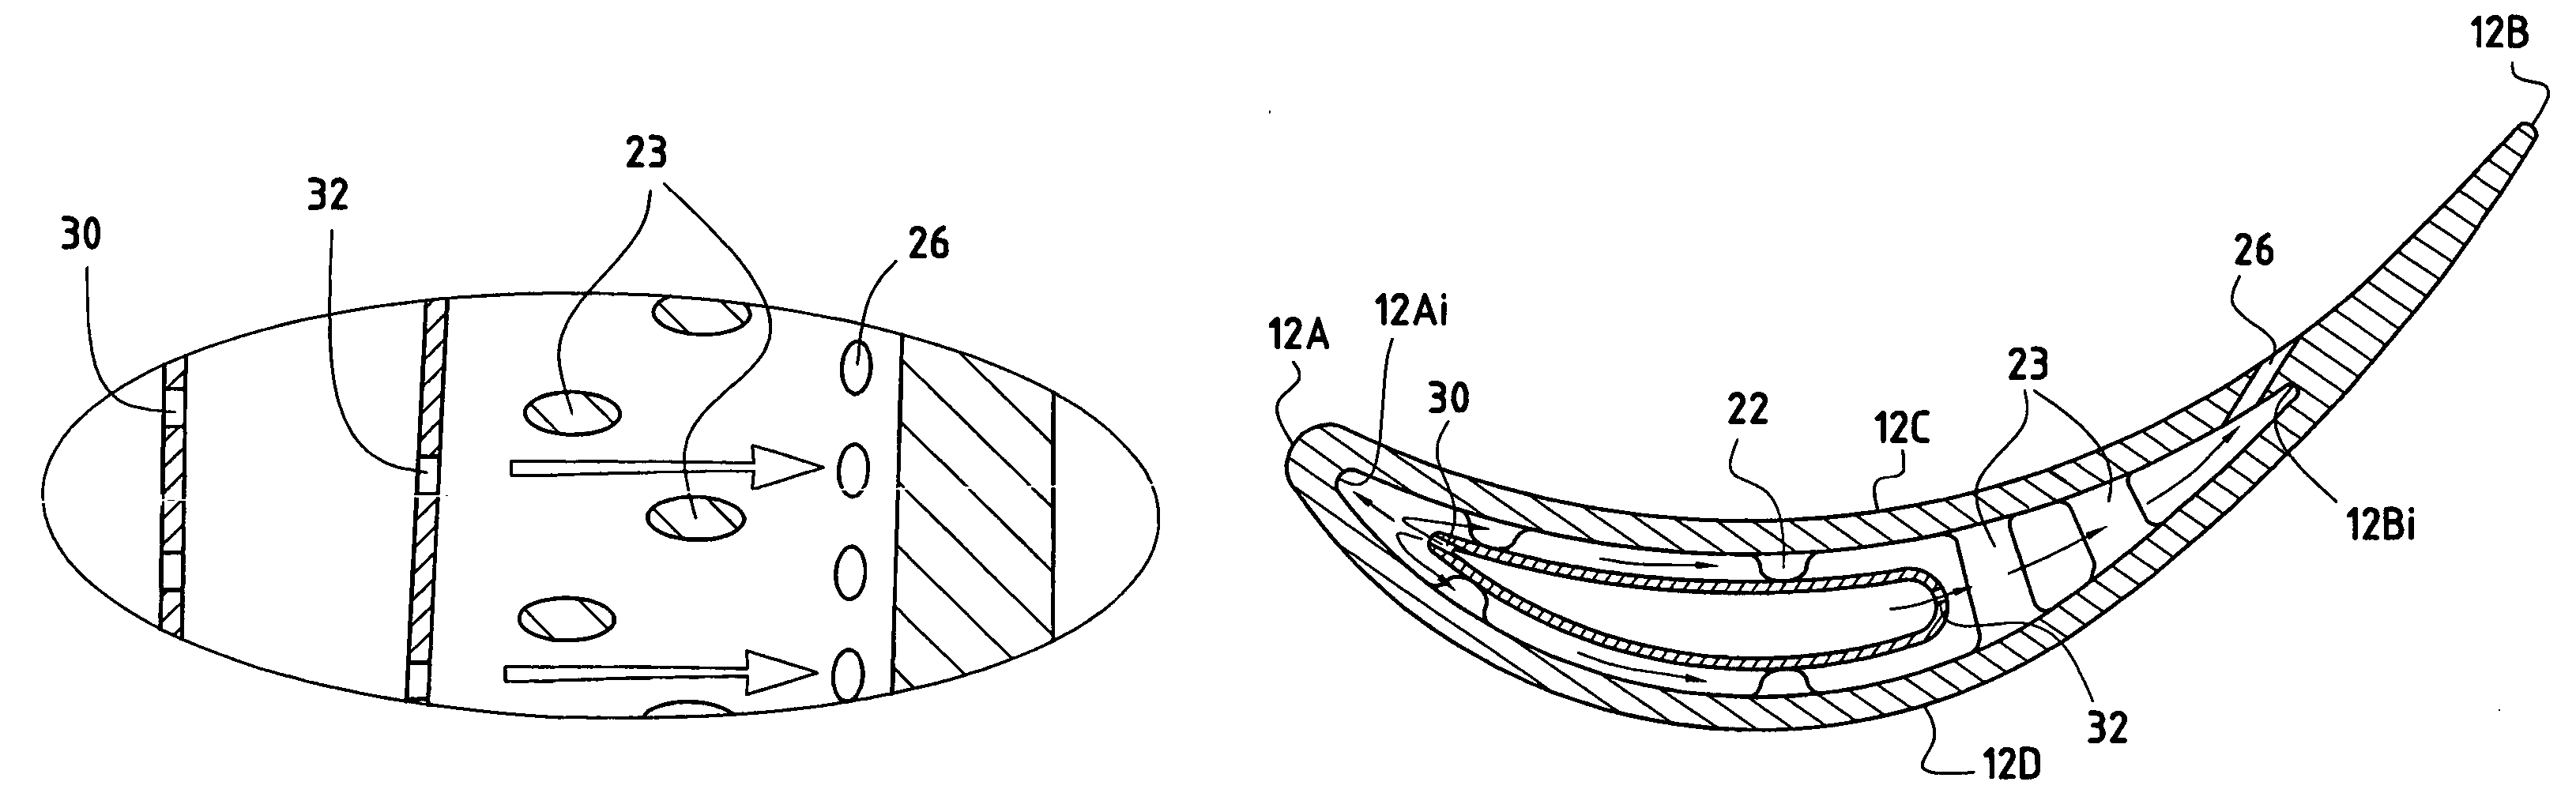 Stator turbine vane with improved cooling